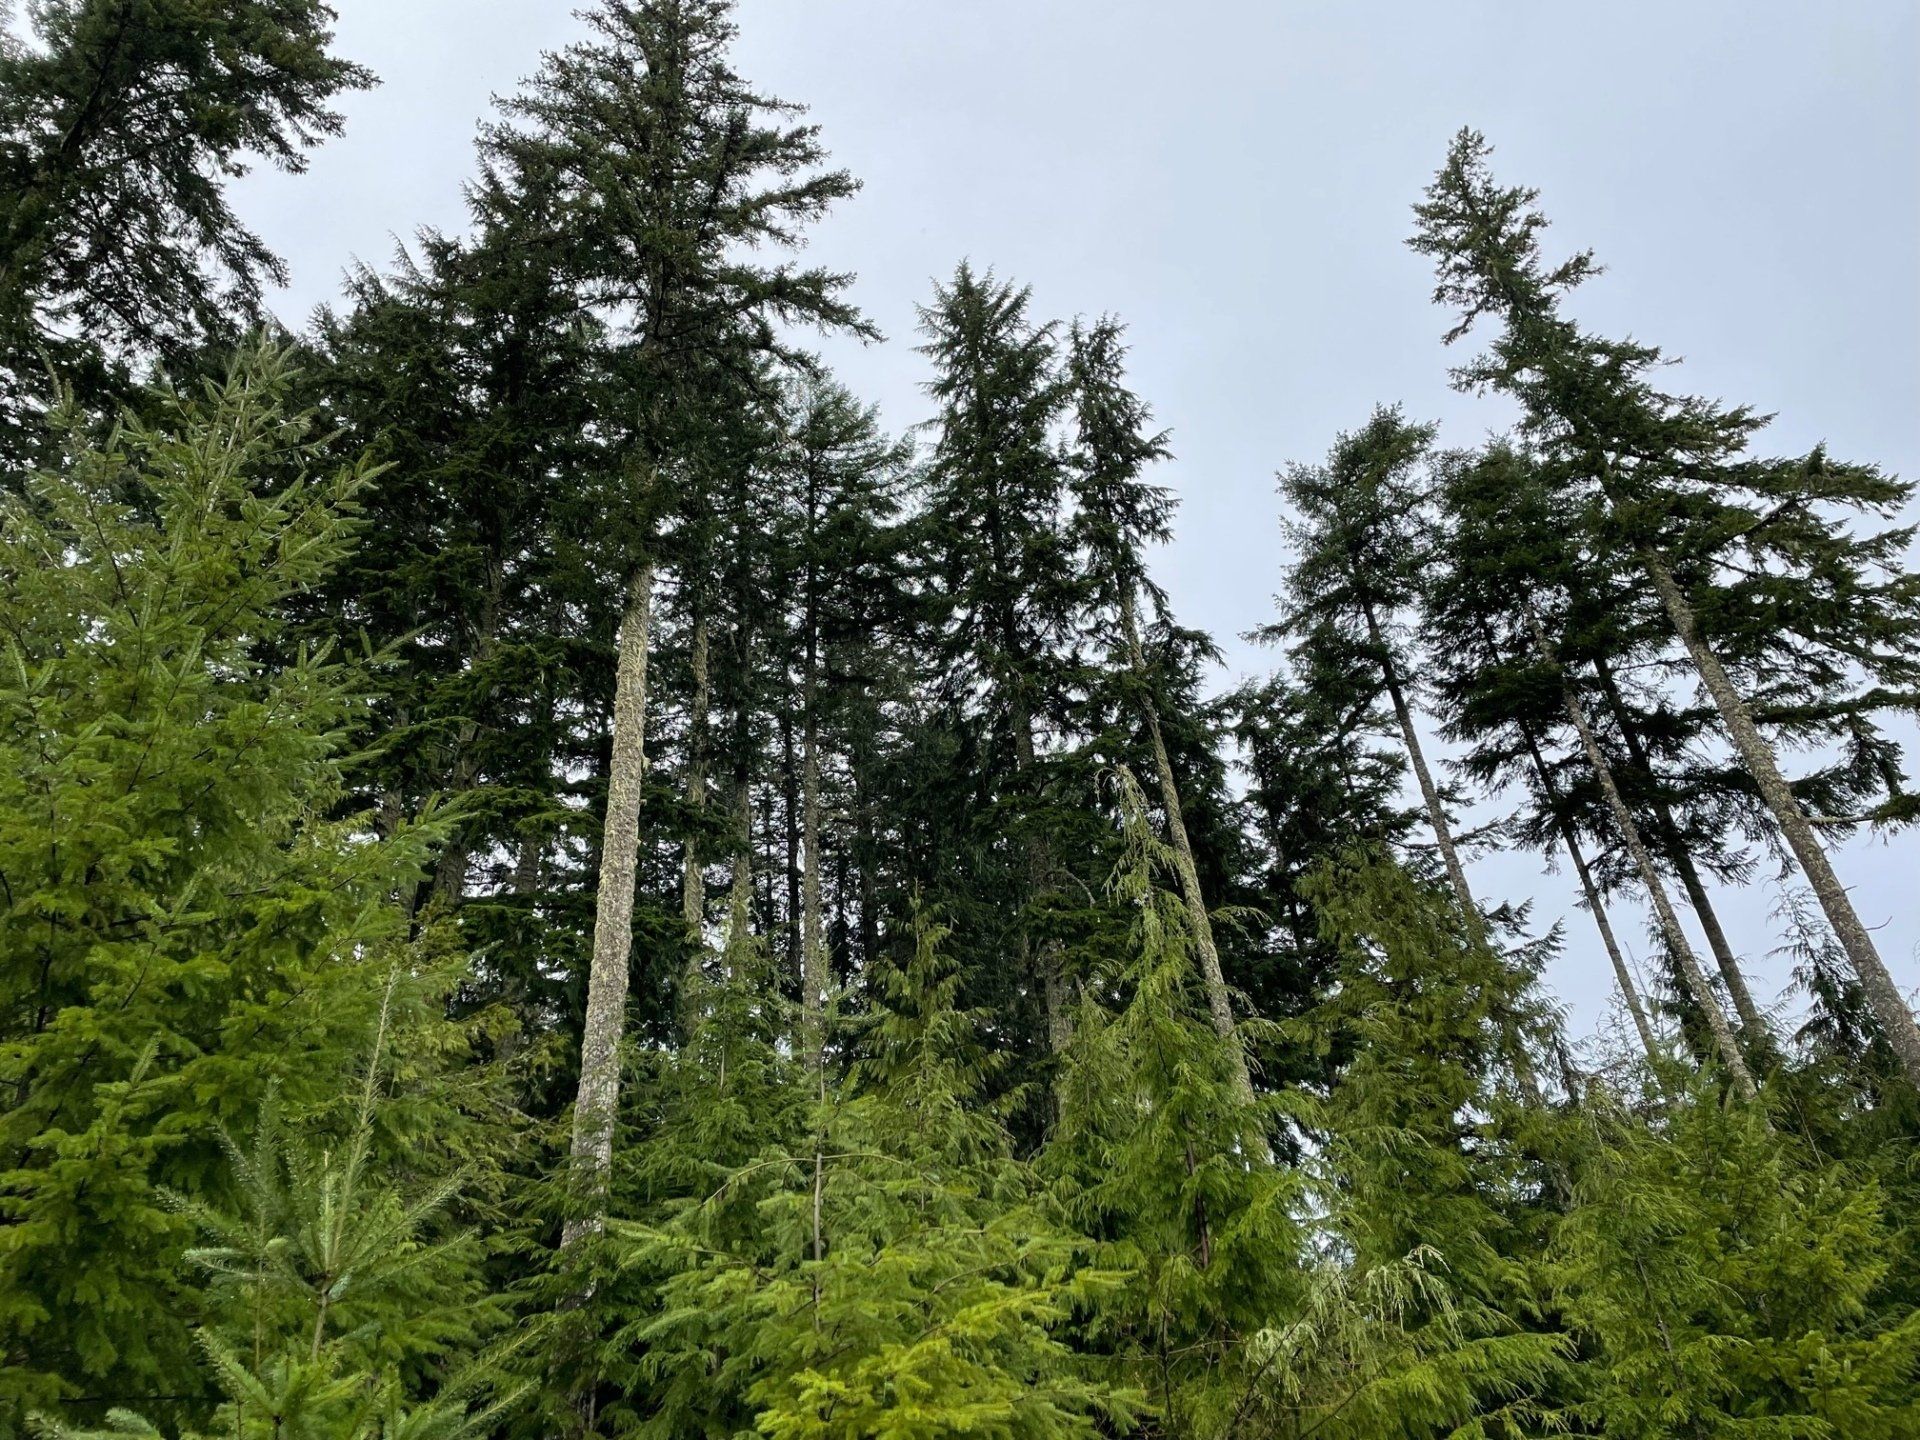 Mature trees in the Taylor Downhill Sorts timber sale tower above a surrounding landscape of clearcuts and young timber plantations. 